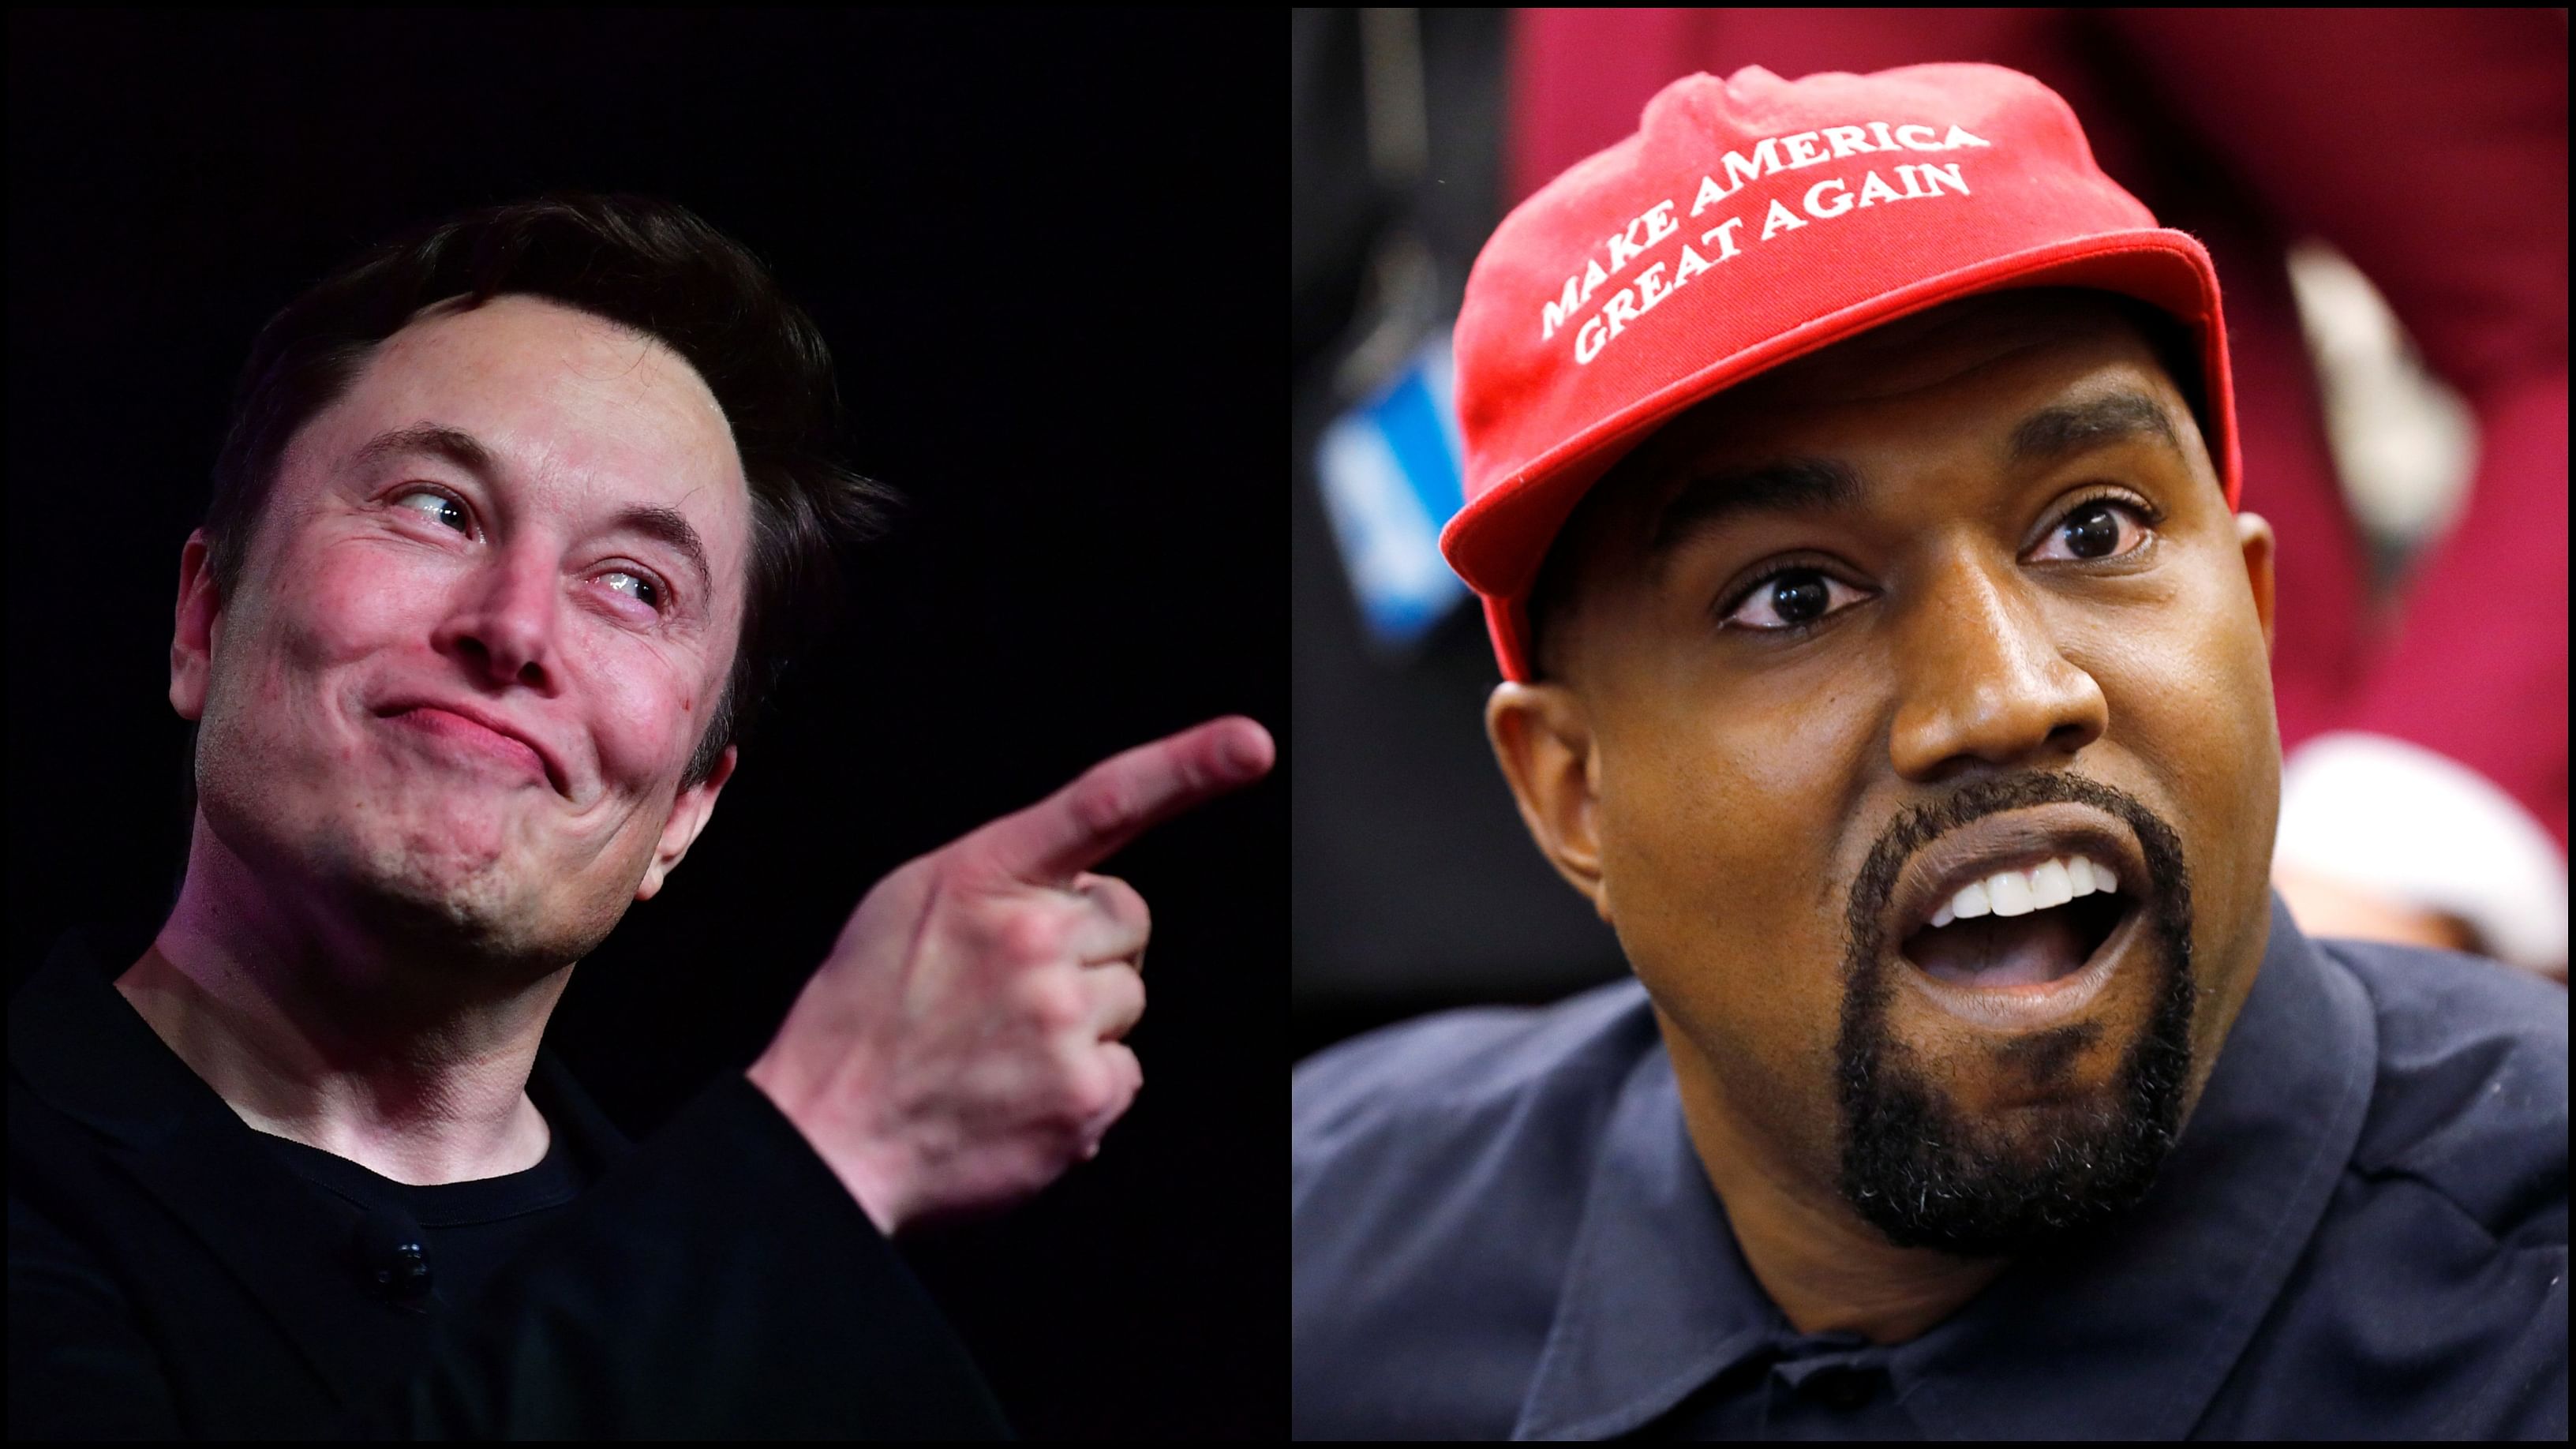 Elon Musk and Kanye West. Credit: AFP and Reuters Photo